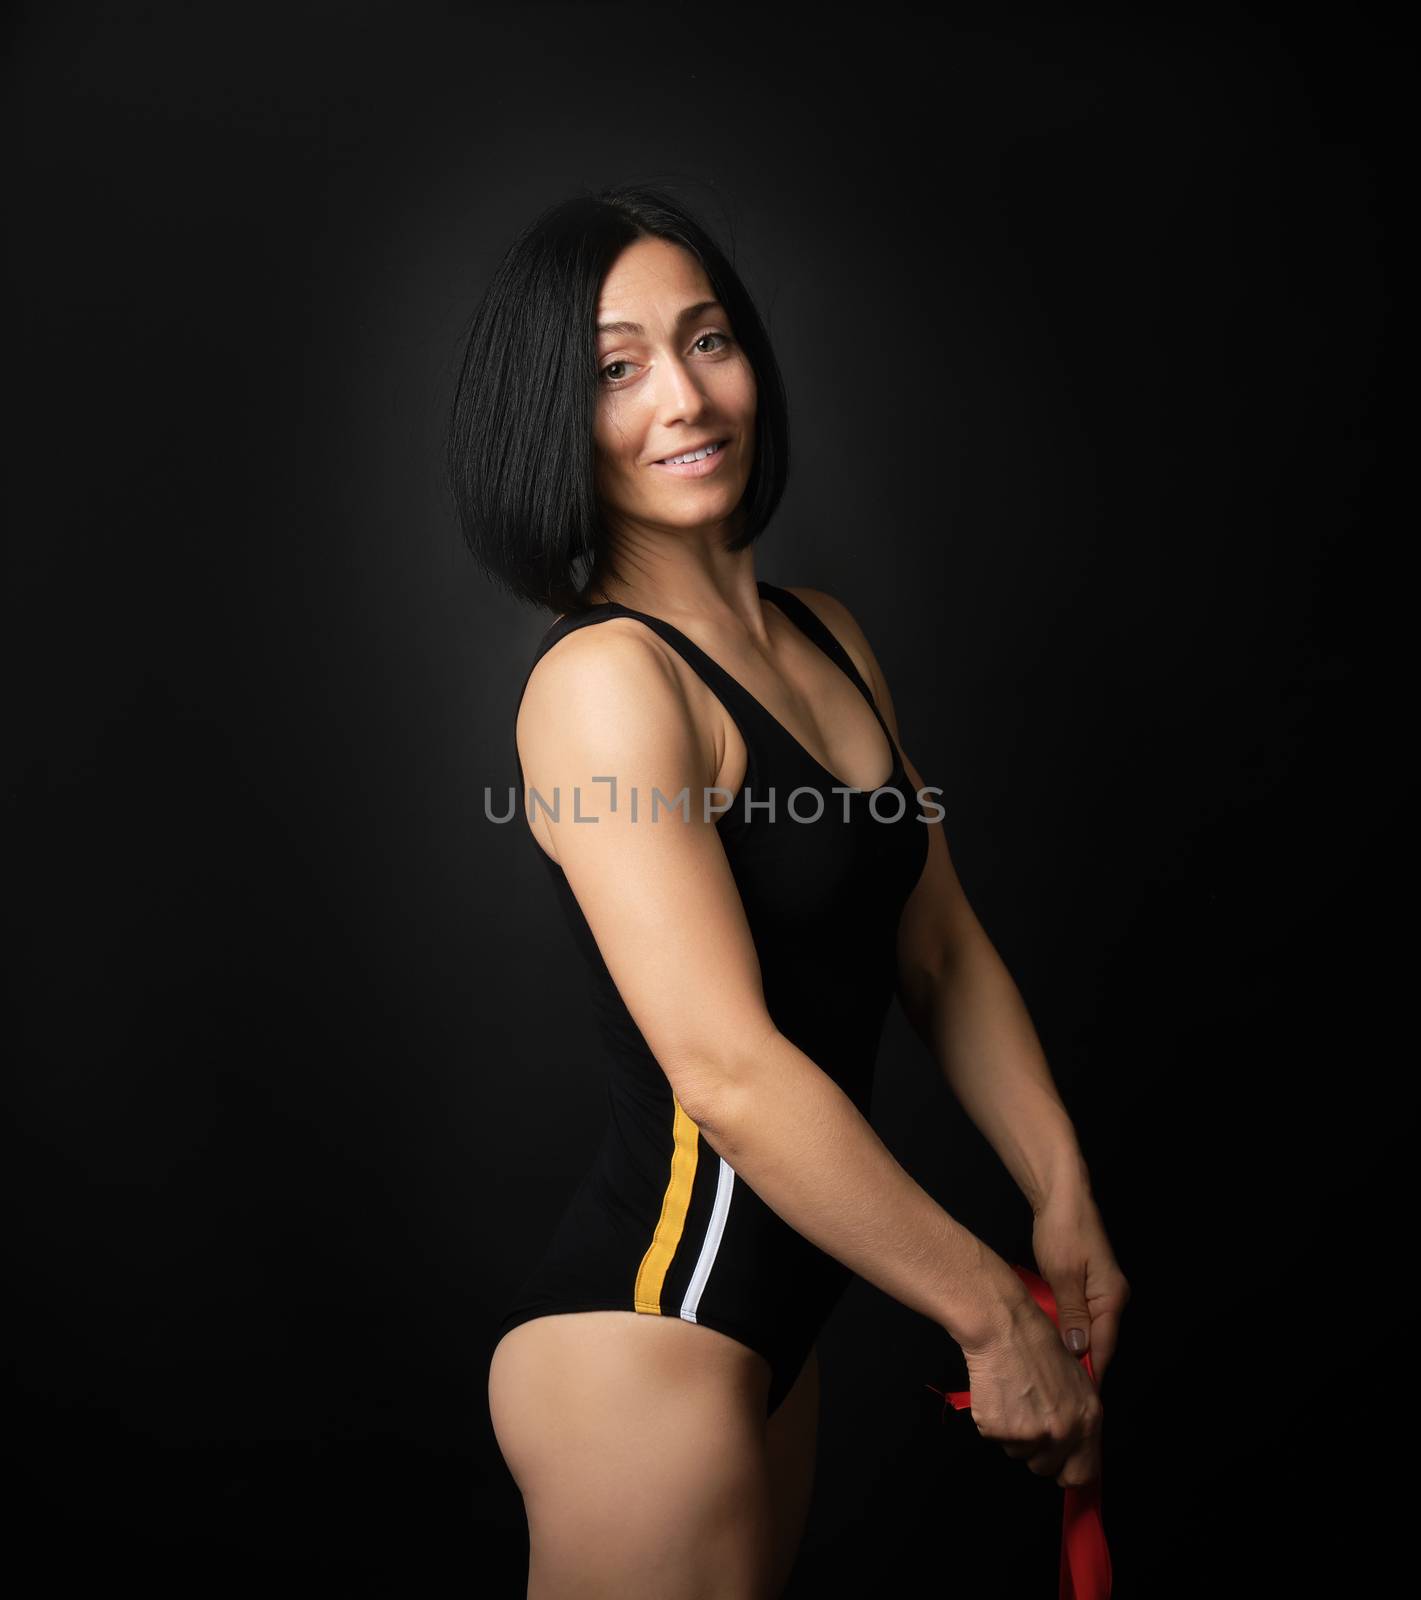 young woman gymnast of Caucasian appearance with black hair spins red satin ribbons, gymnastic exercises on black background